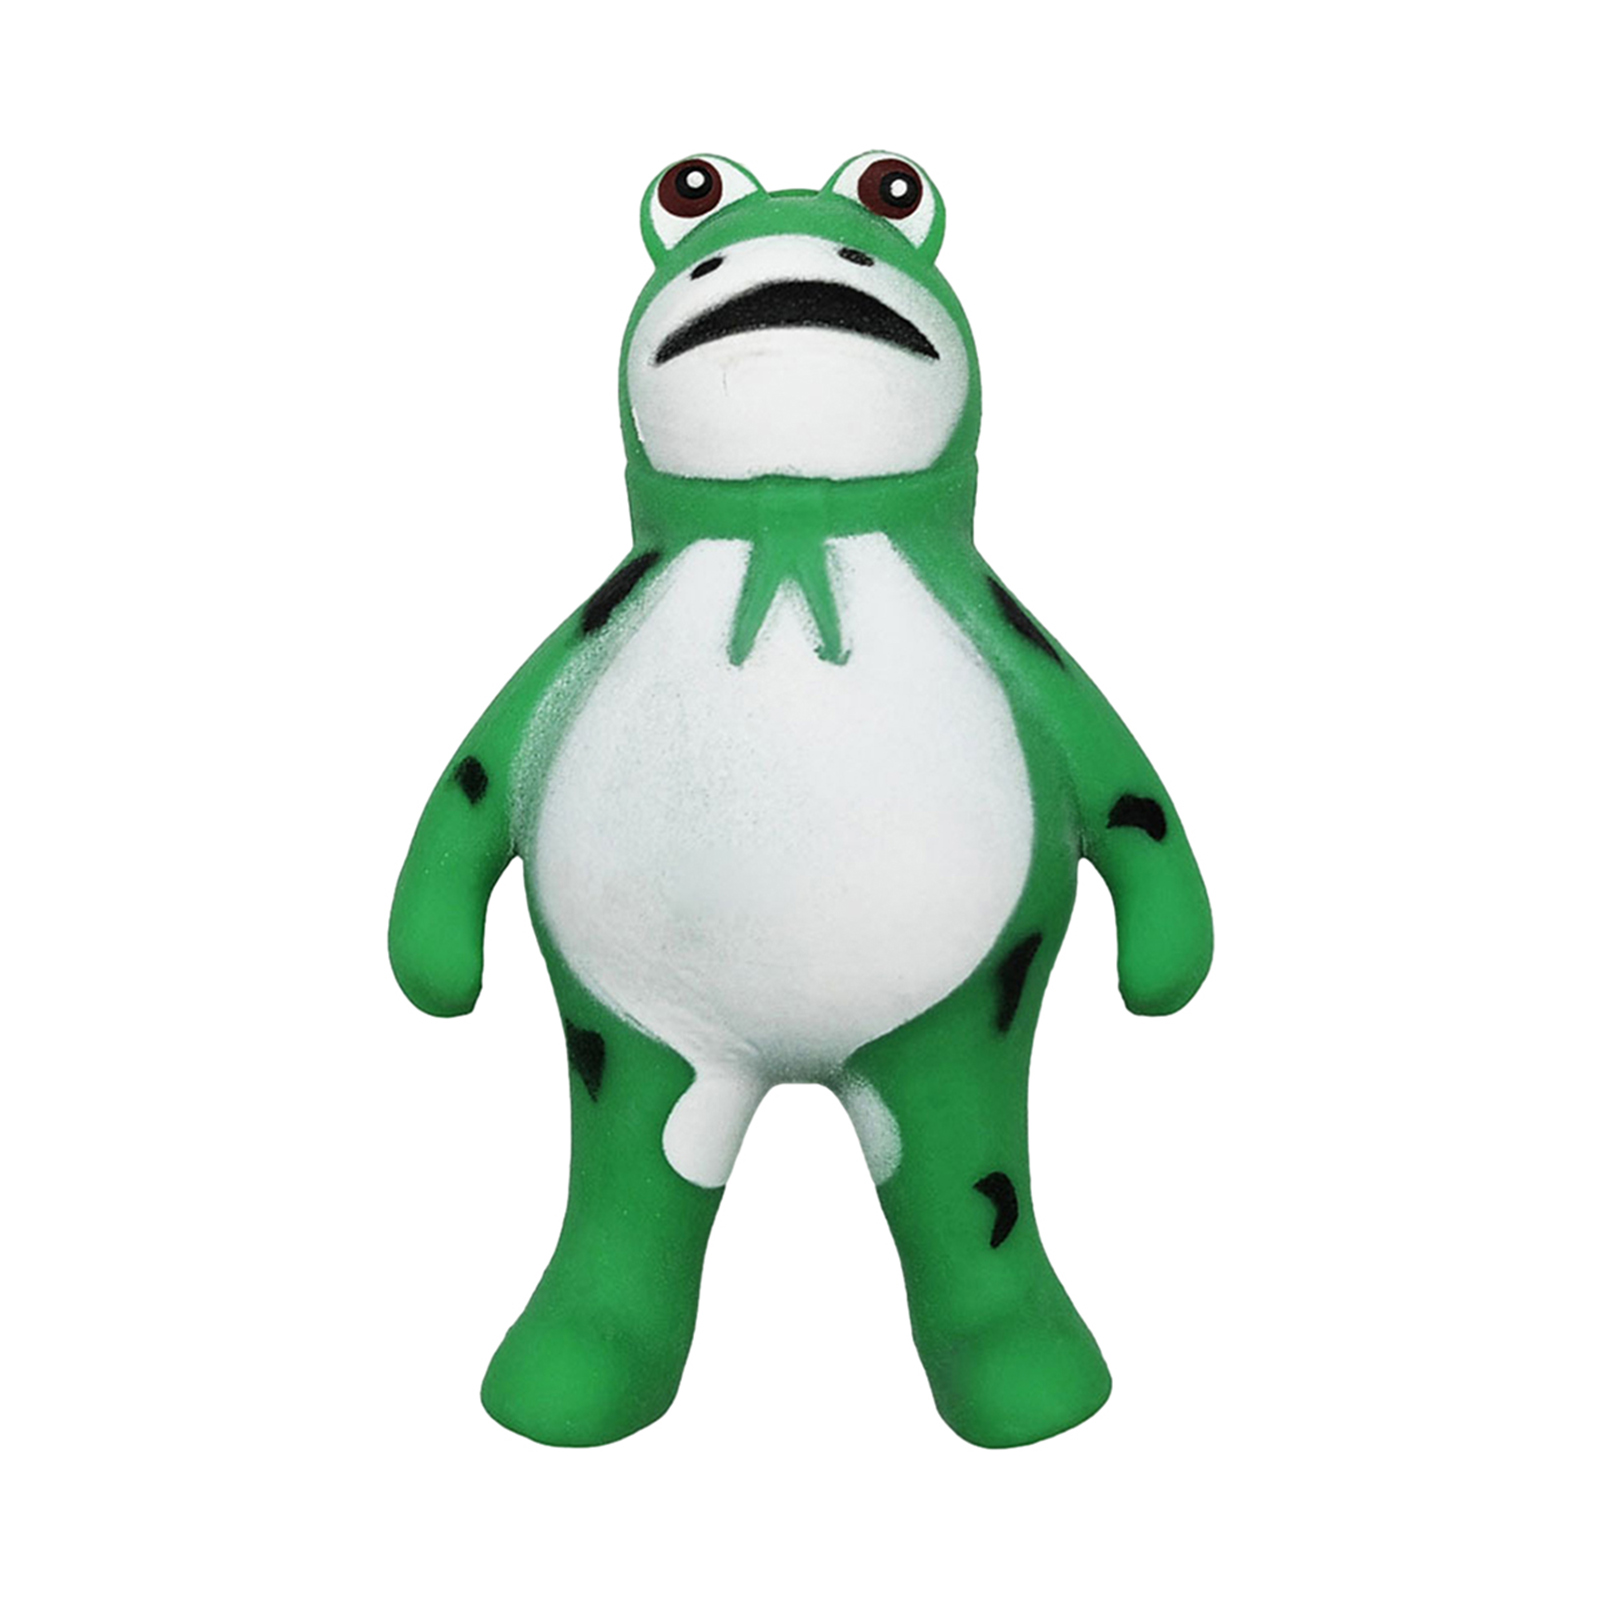 microgood Stress Relief Frog Squeeze Toy Soft And Stretchy